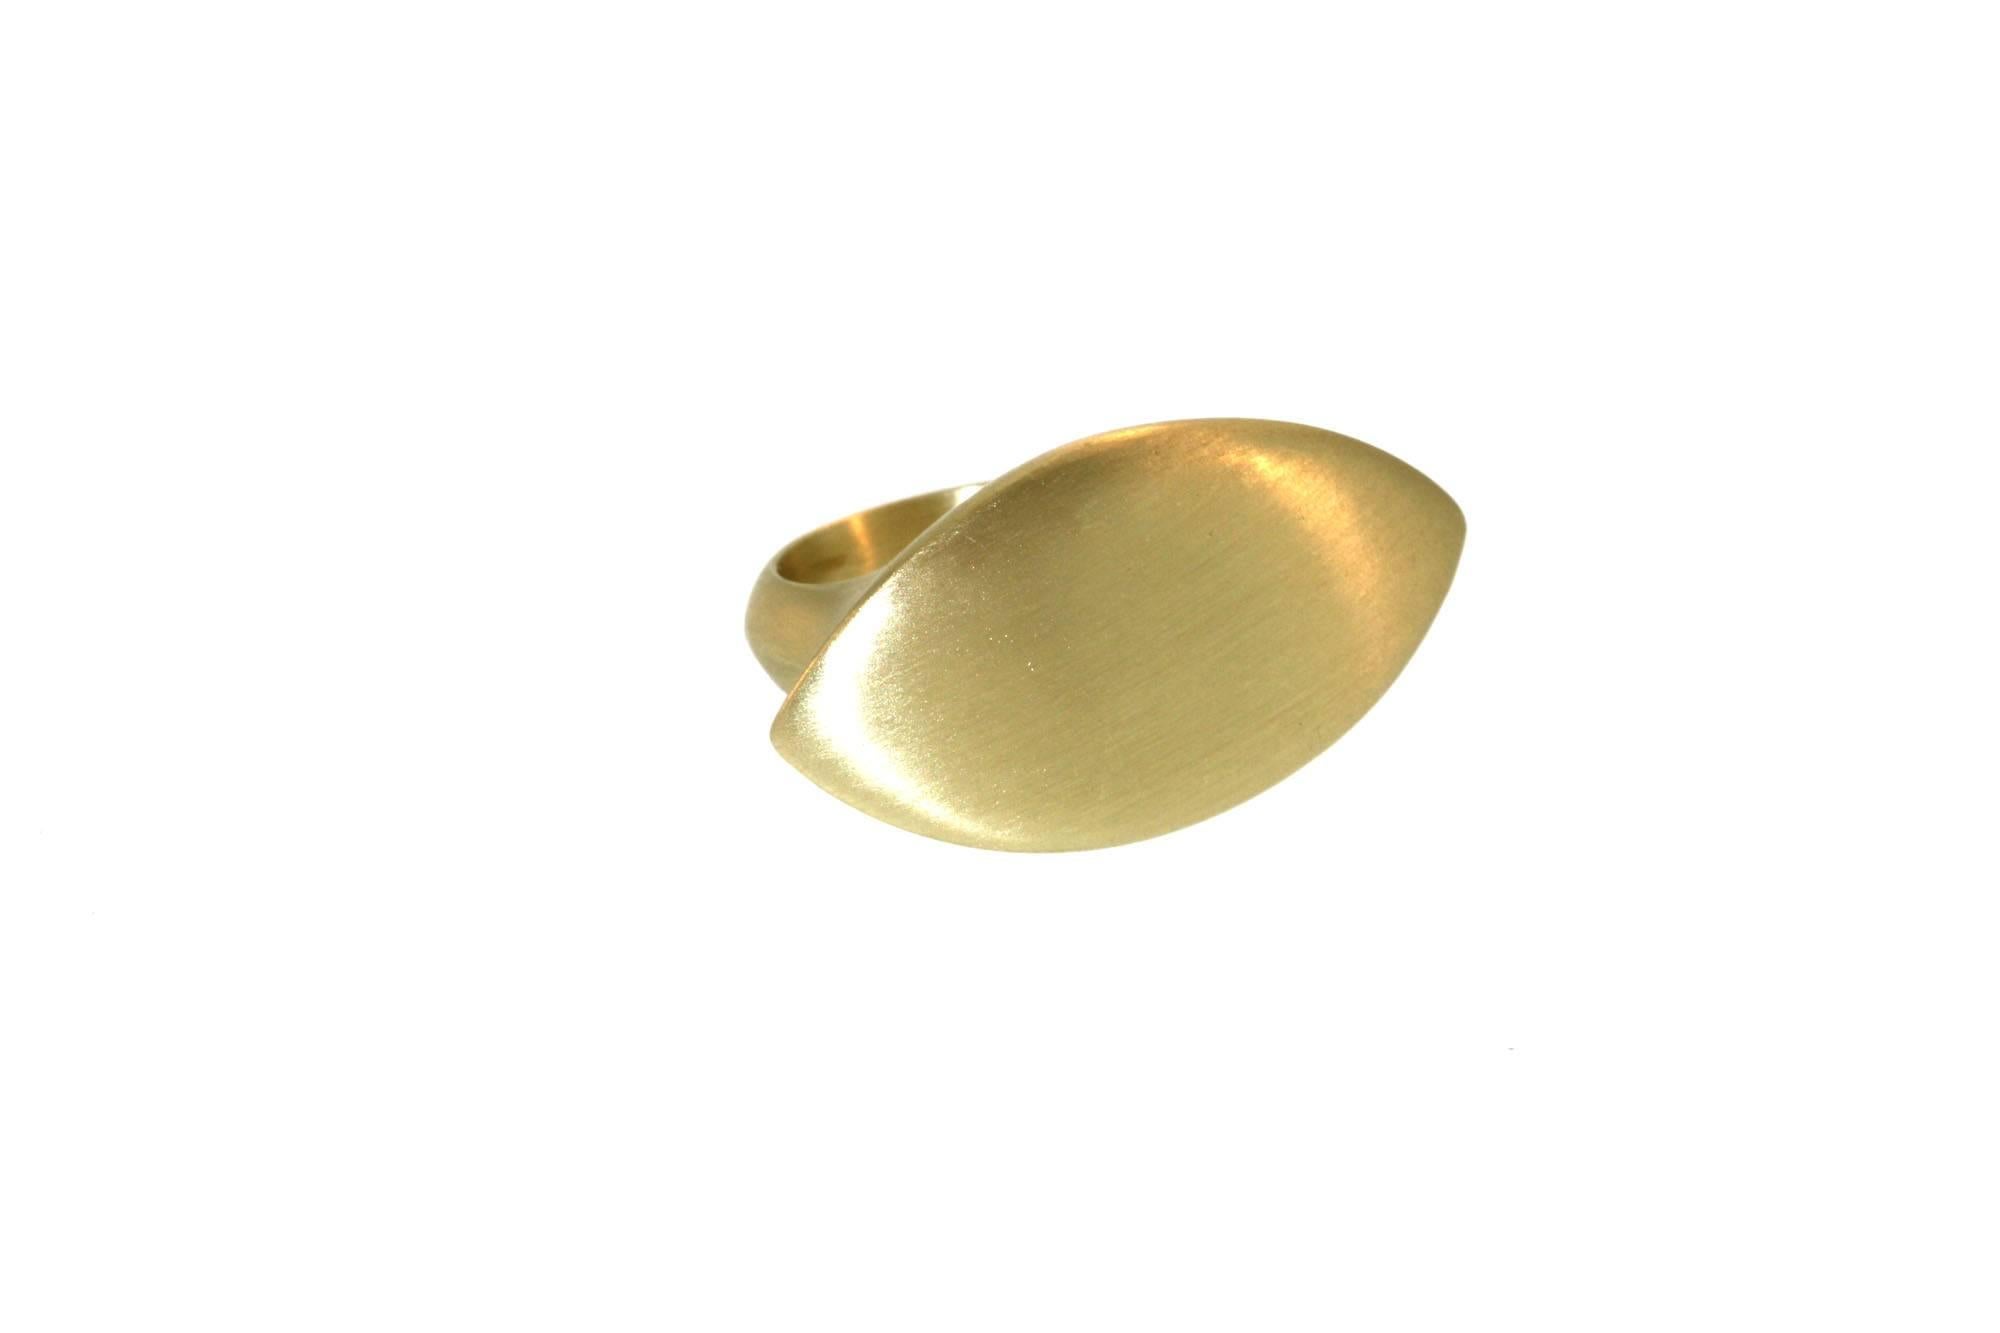 Smooth and seamless to the touch, this gold marquis ring makes a strong and chic statement. A great ring for the middle finger as it overlaps onto the index and ring finger, and could also be stacked with other rings. This ring has a substantial